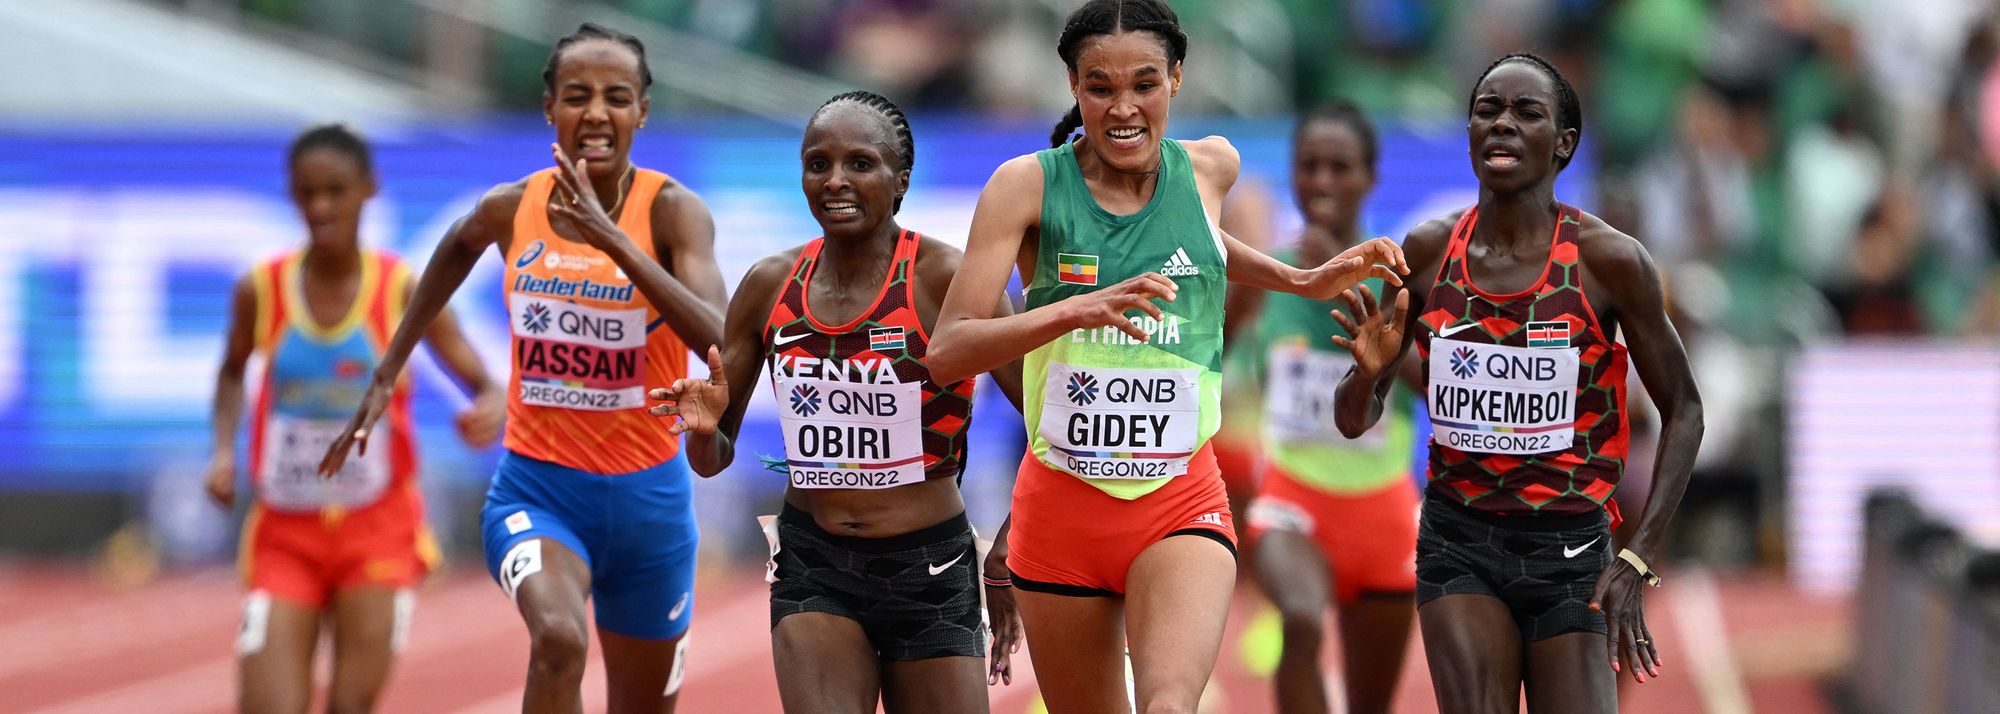 World Athletics Championships Oregon22 have provided ideal conditions for the best track and field athletes in the world to shine on a global stage